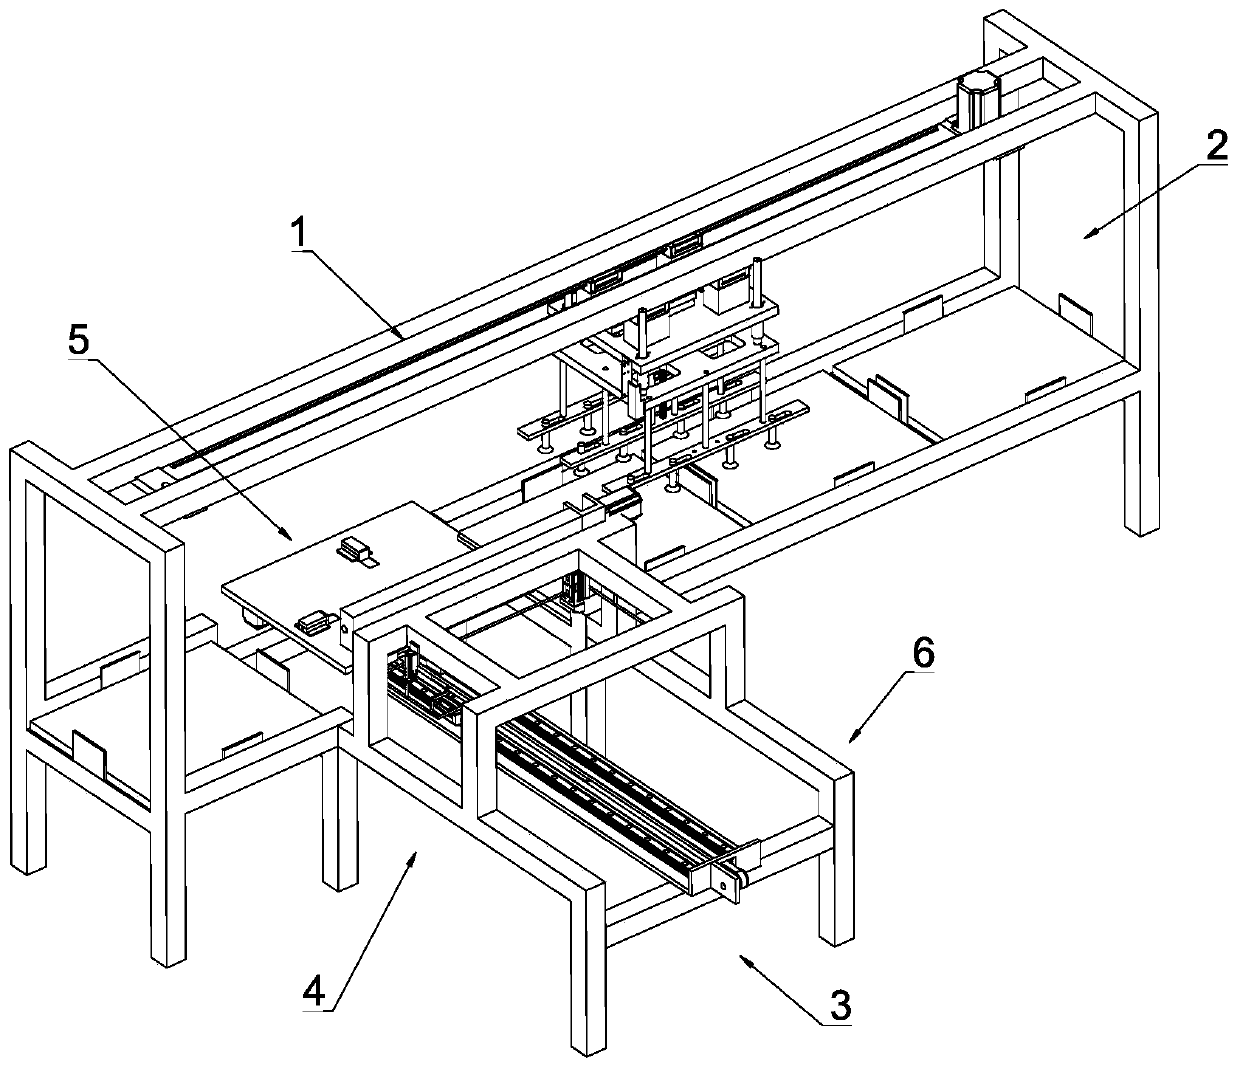 Loading device used for board composite welding